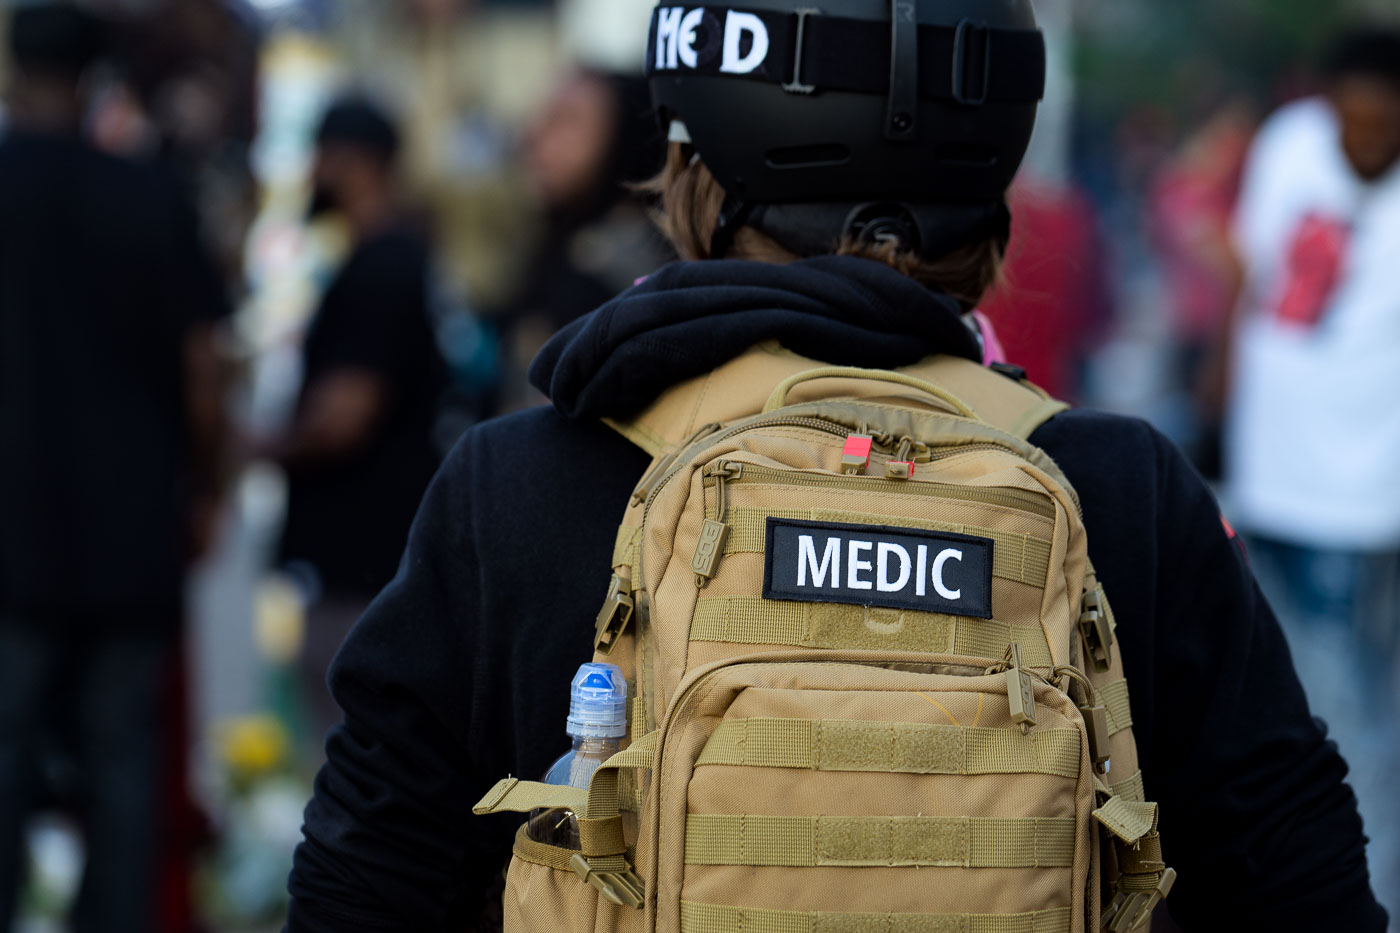 Medic patch on the back of a backpack